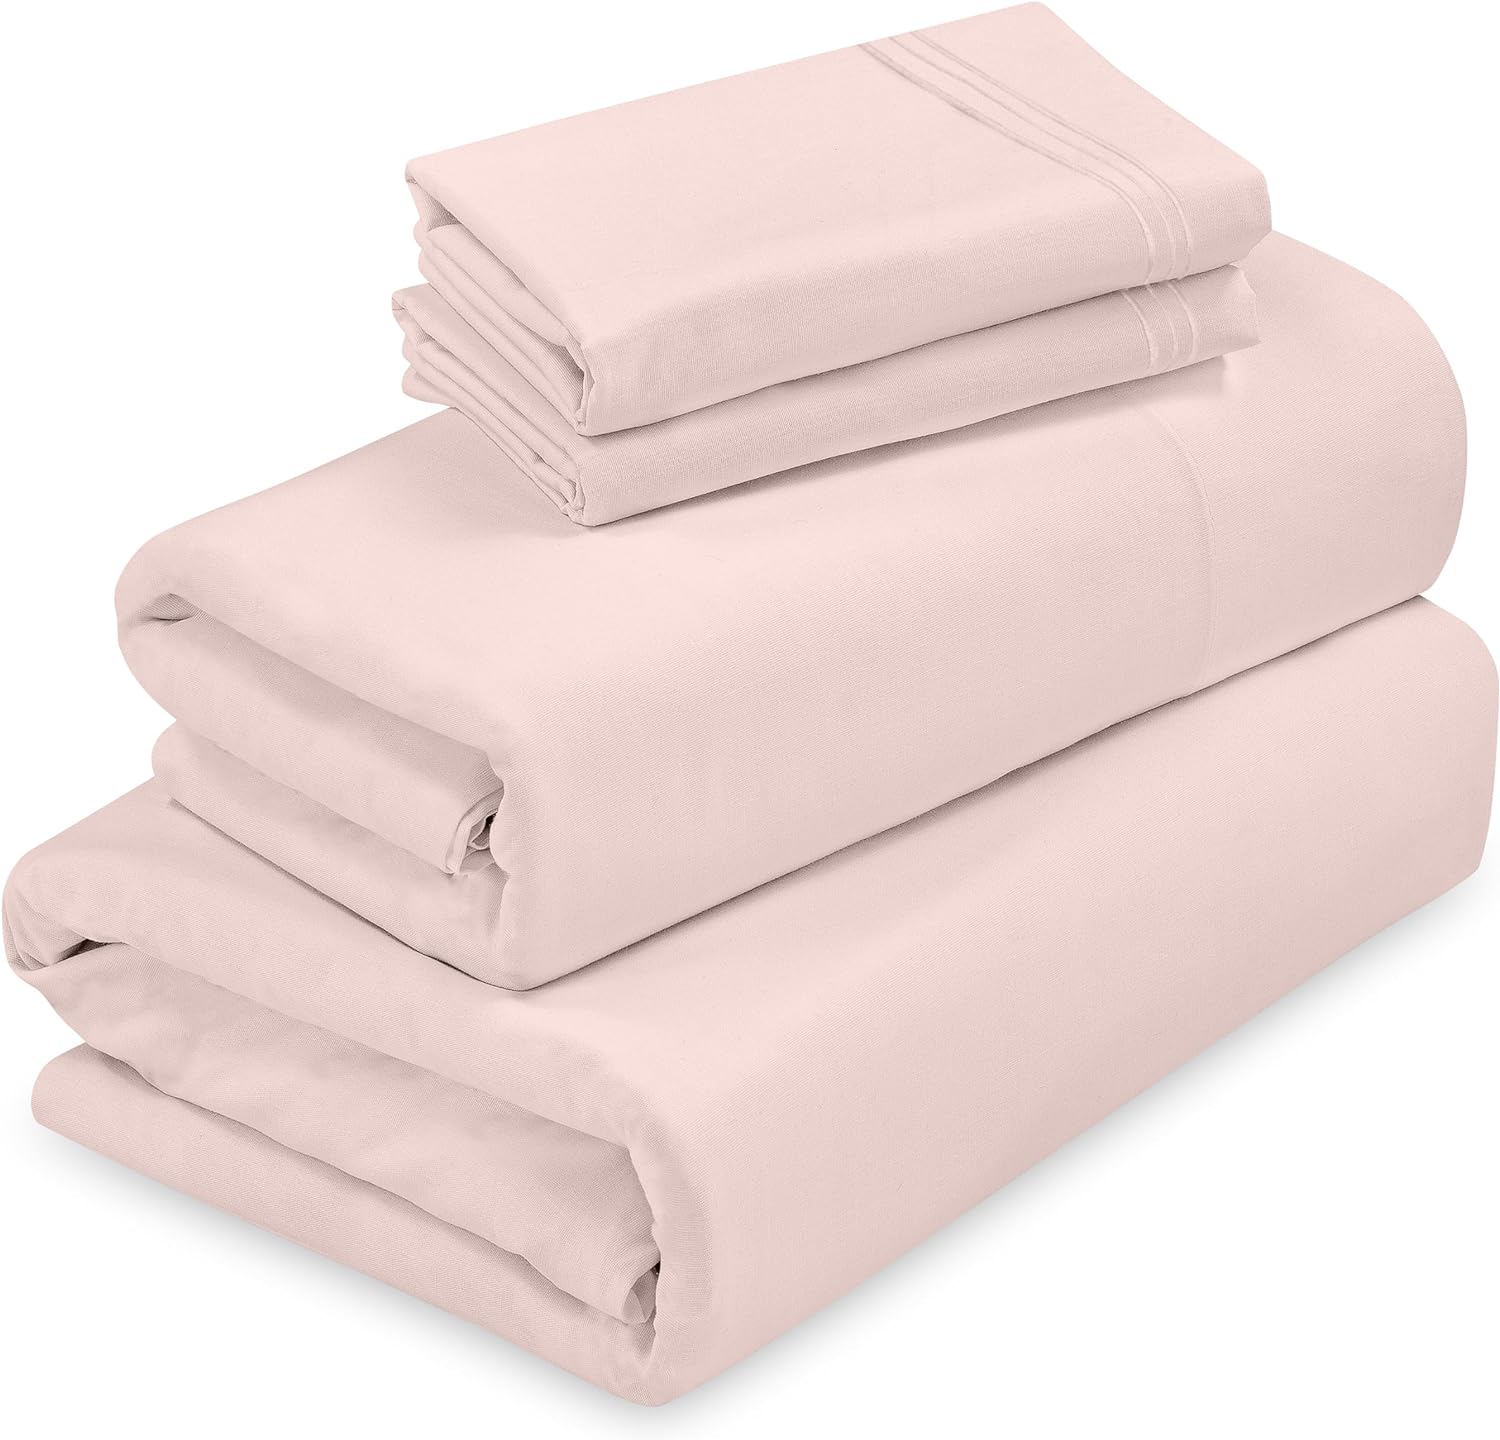 ROYALE LINENS - 3 Piece Twin Bed Sheet - Soft Brushed Microfiber 1800 Bedding Set - 1 Fitted Sheet, 1 Flat Sheet, 1 Pillow case - Wrinkle & Fade Resistant Luxury Twin Size Sheet Set (Twin, Pink)